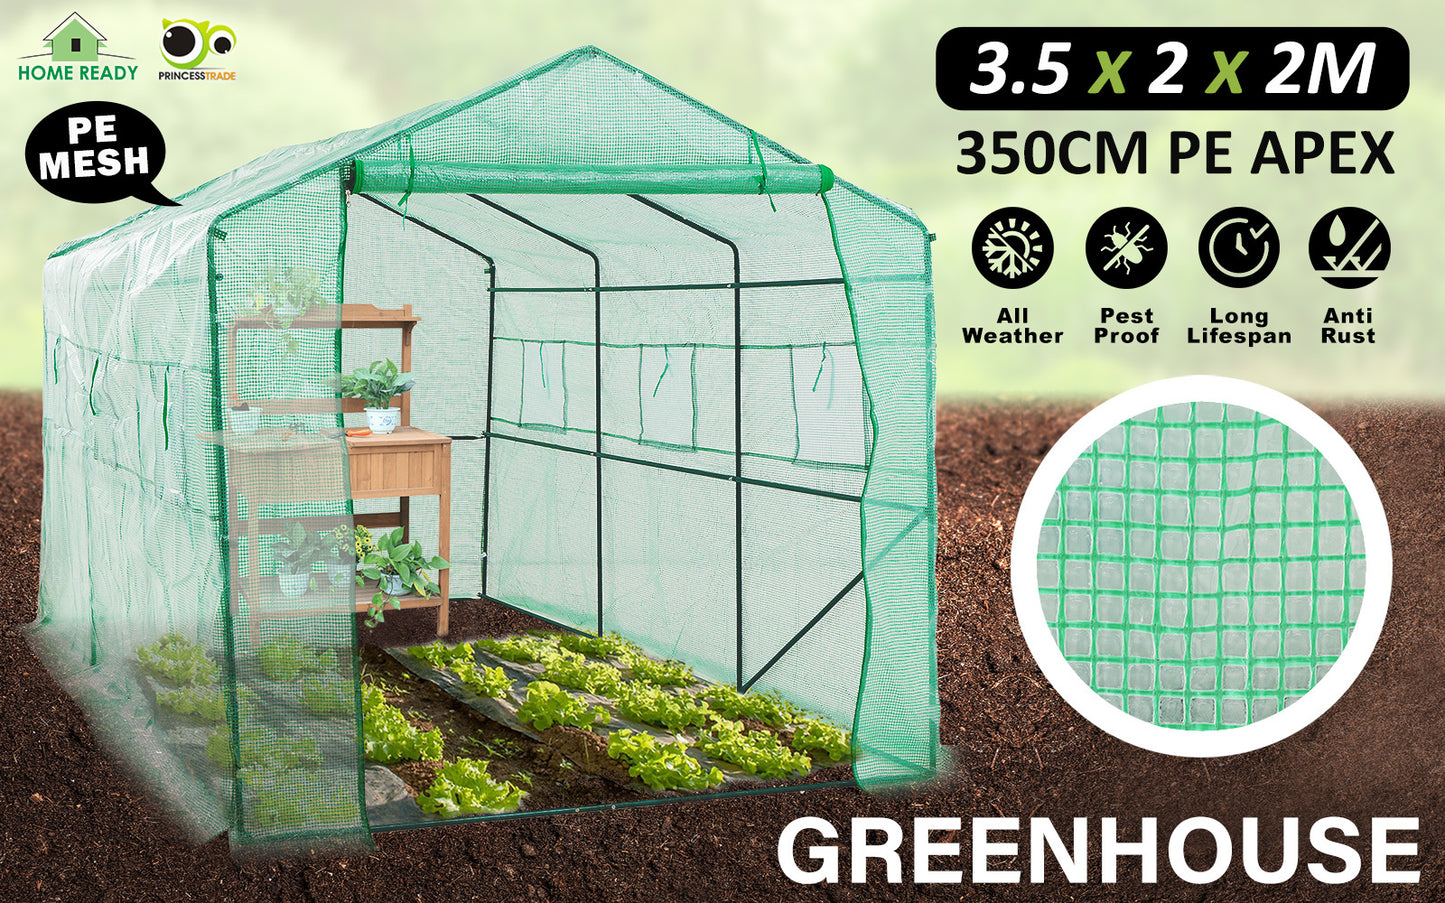 Home Ready Apex 3.5x2x2M Garden Greenhouse Walk-In Shed PE - image2